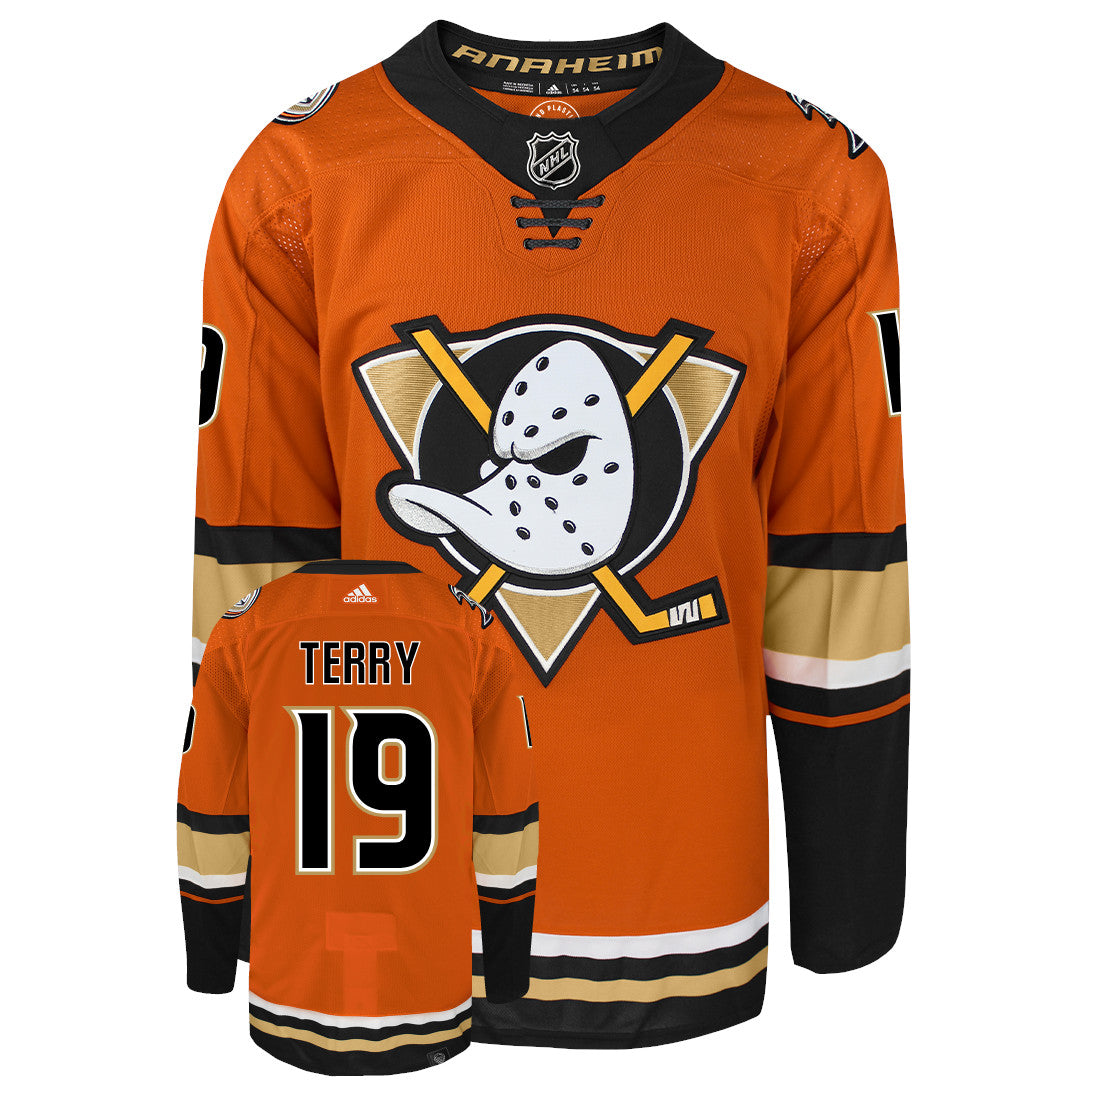 Troy Terry Anaheim Ducks Adidas Primegreen Authentic Third Alternate NHL Hockey Jersey - Front/Back View